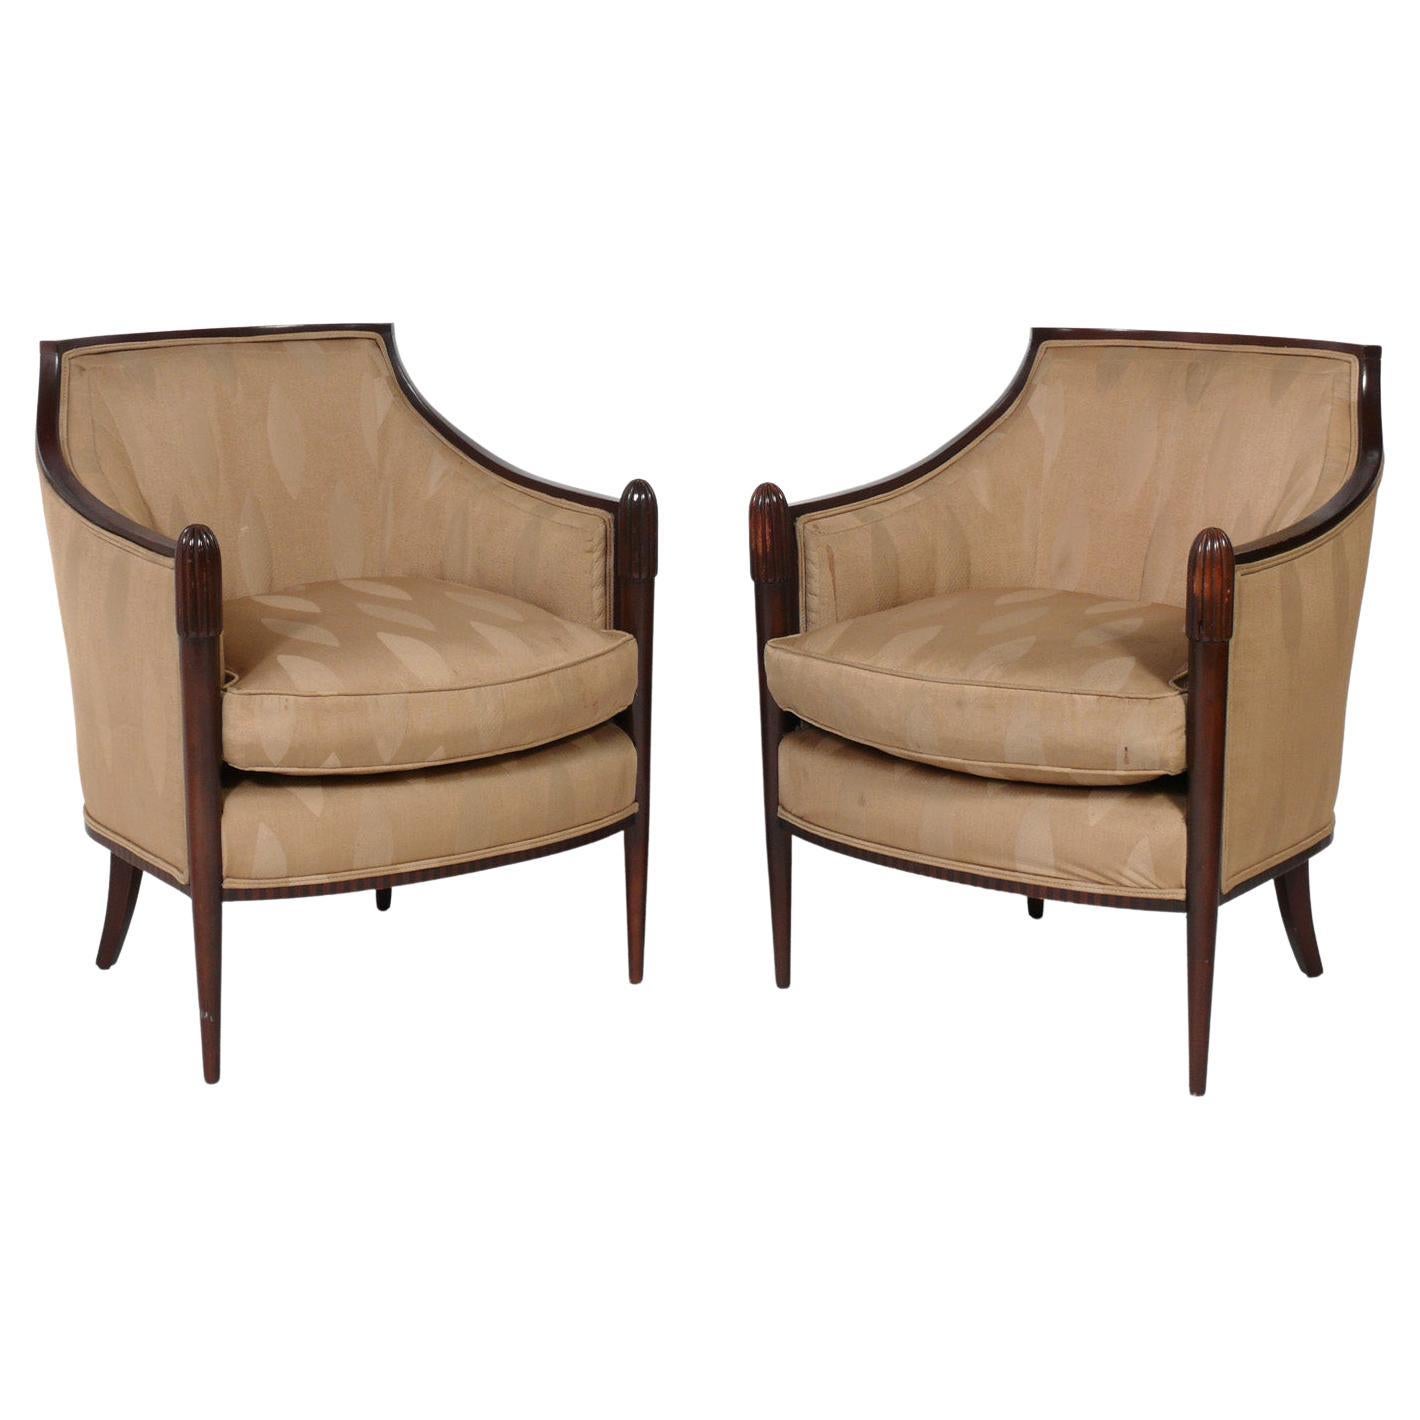 Pair of Art Deco Style Chairs by Barbara Barry for Baker Refinished Reupholsterd